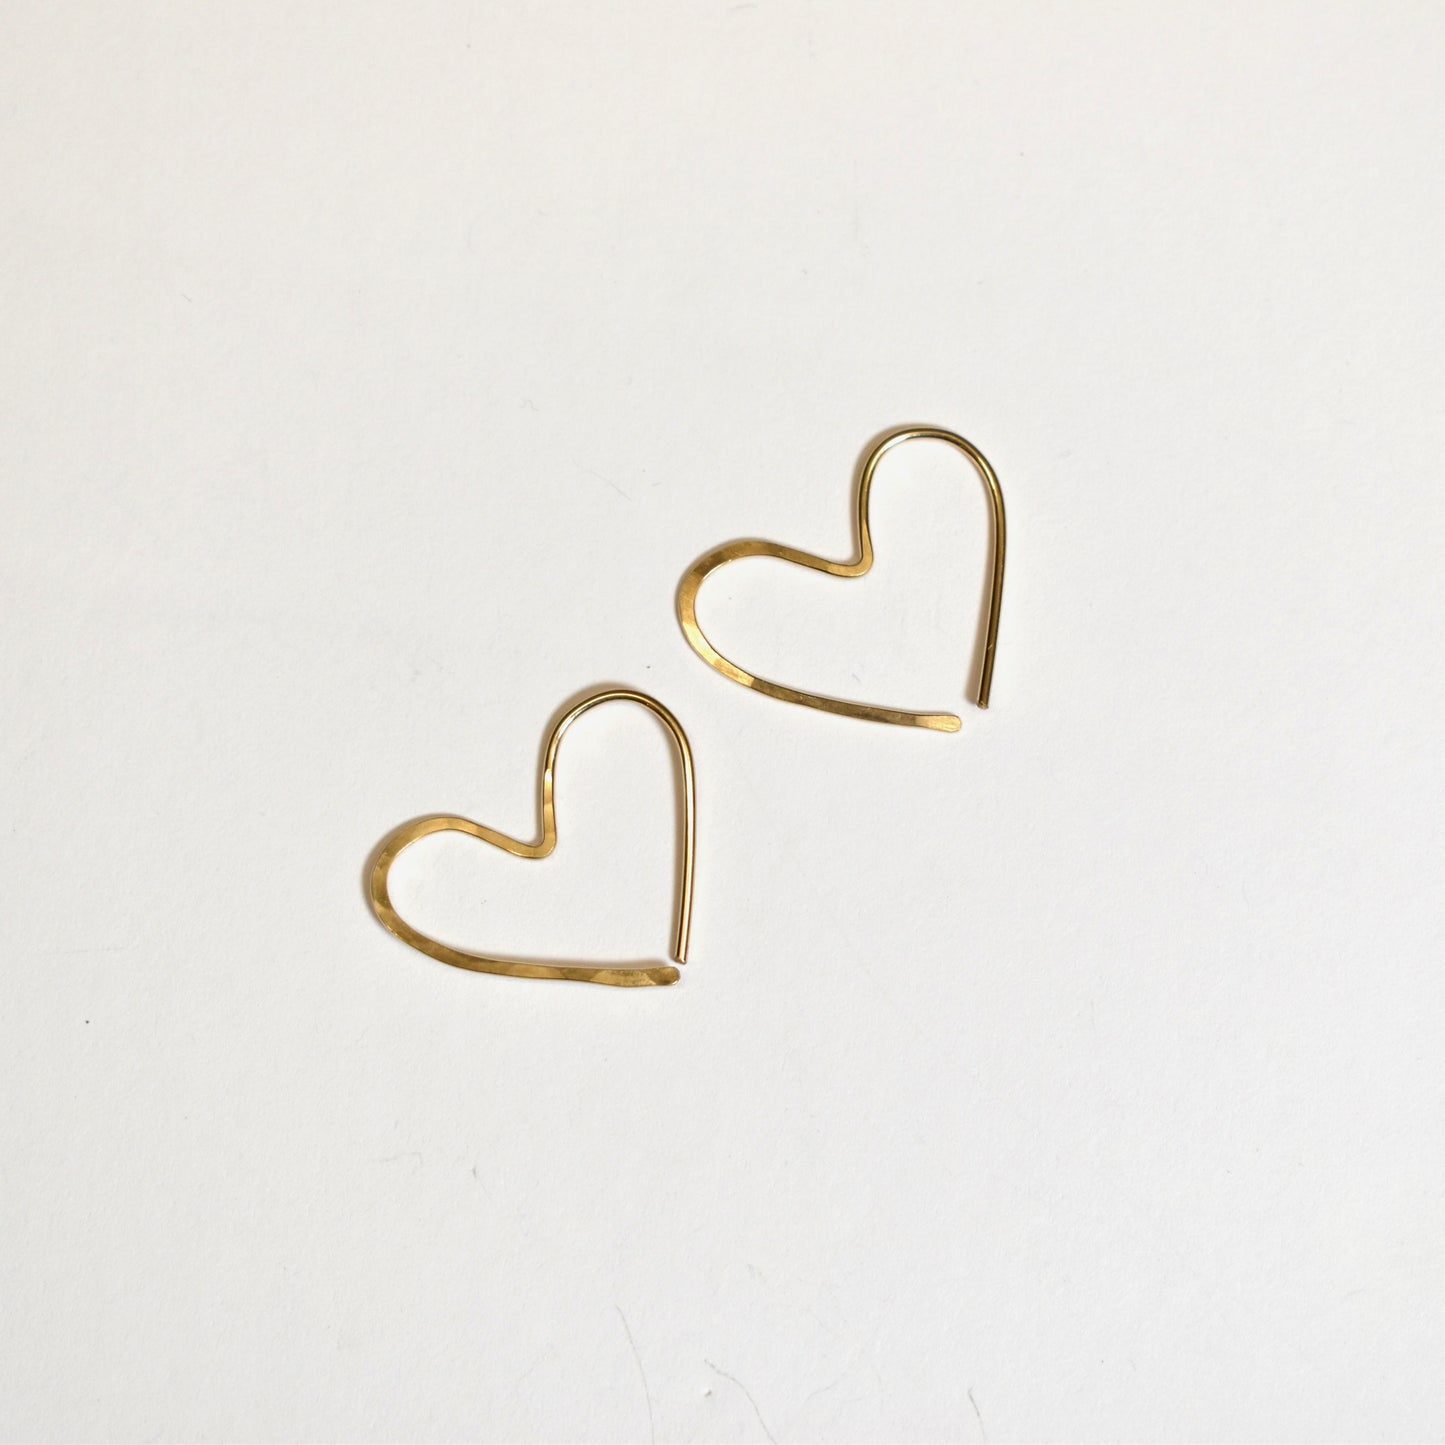 Heart earrings featuring gold filled hammered hoops. Designed and handmade in Maine by Lynne Stewart Designs.